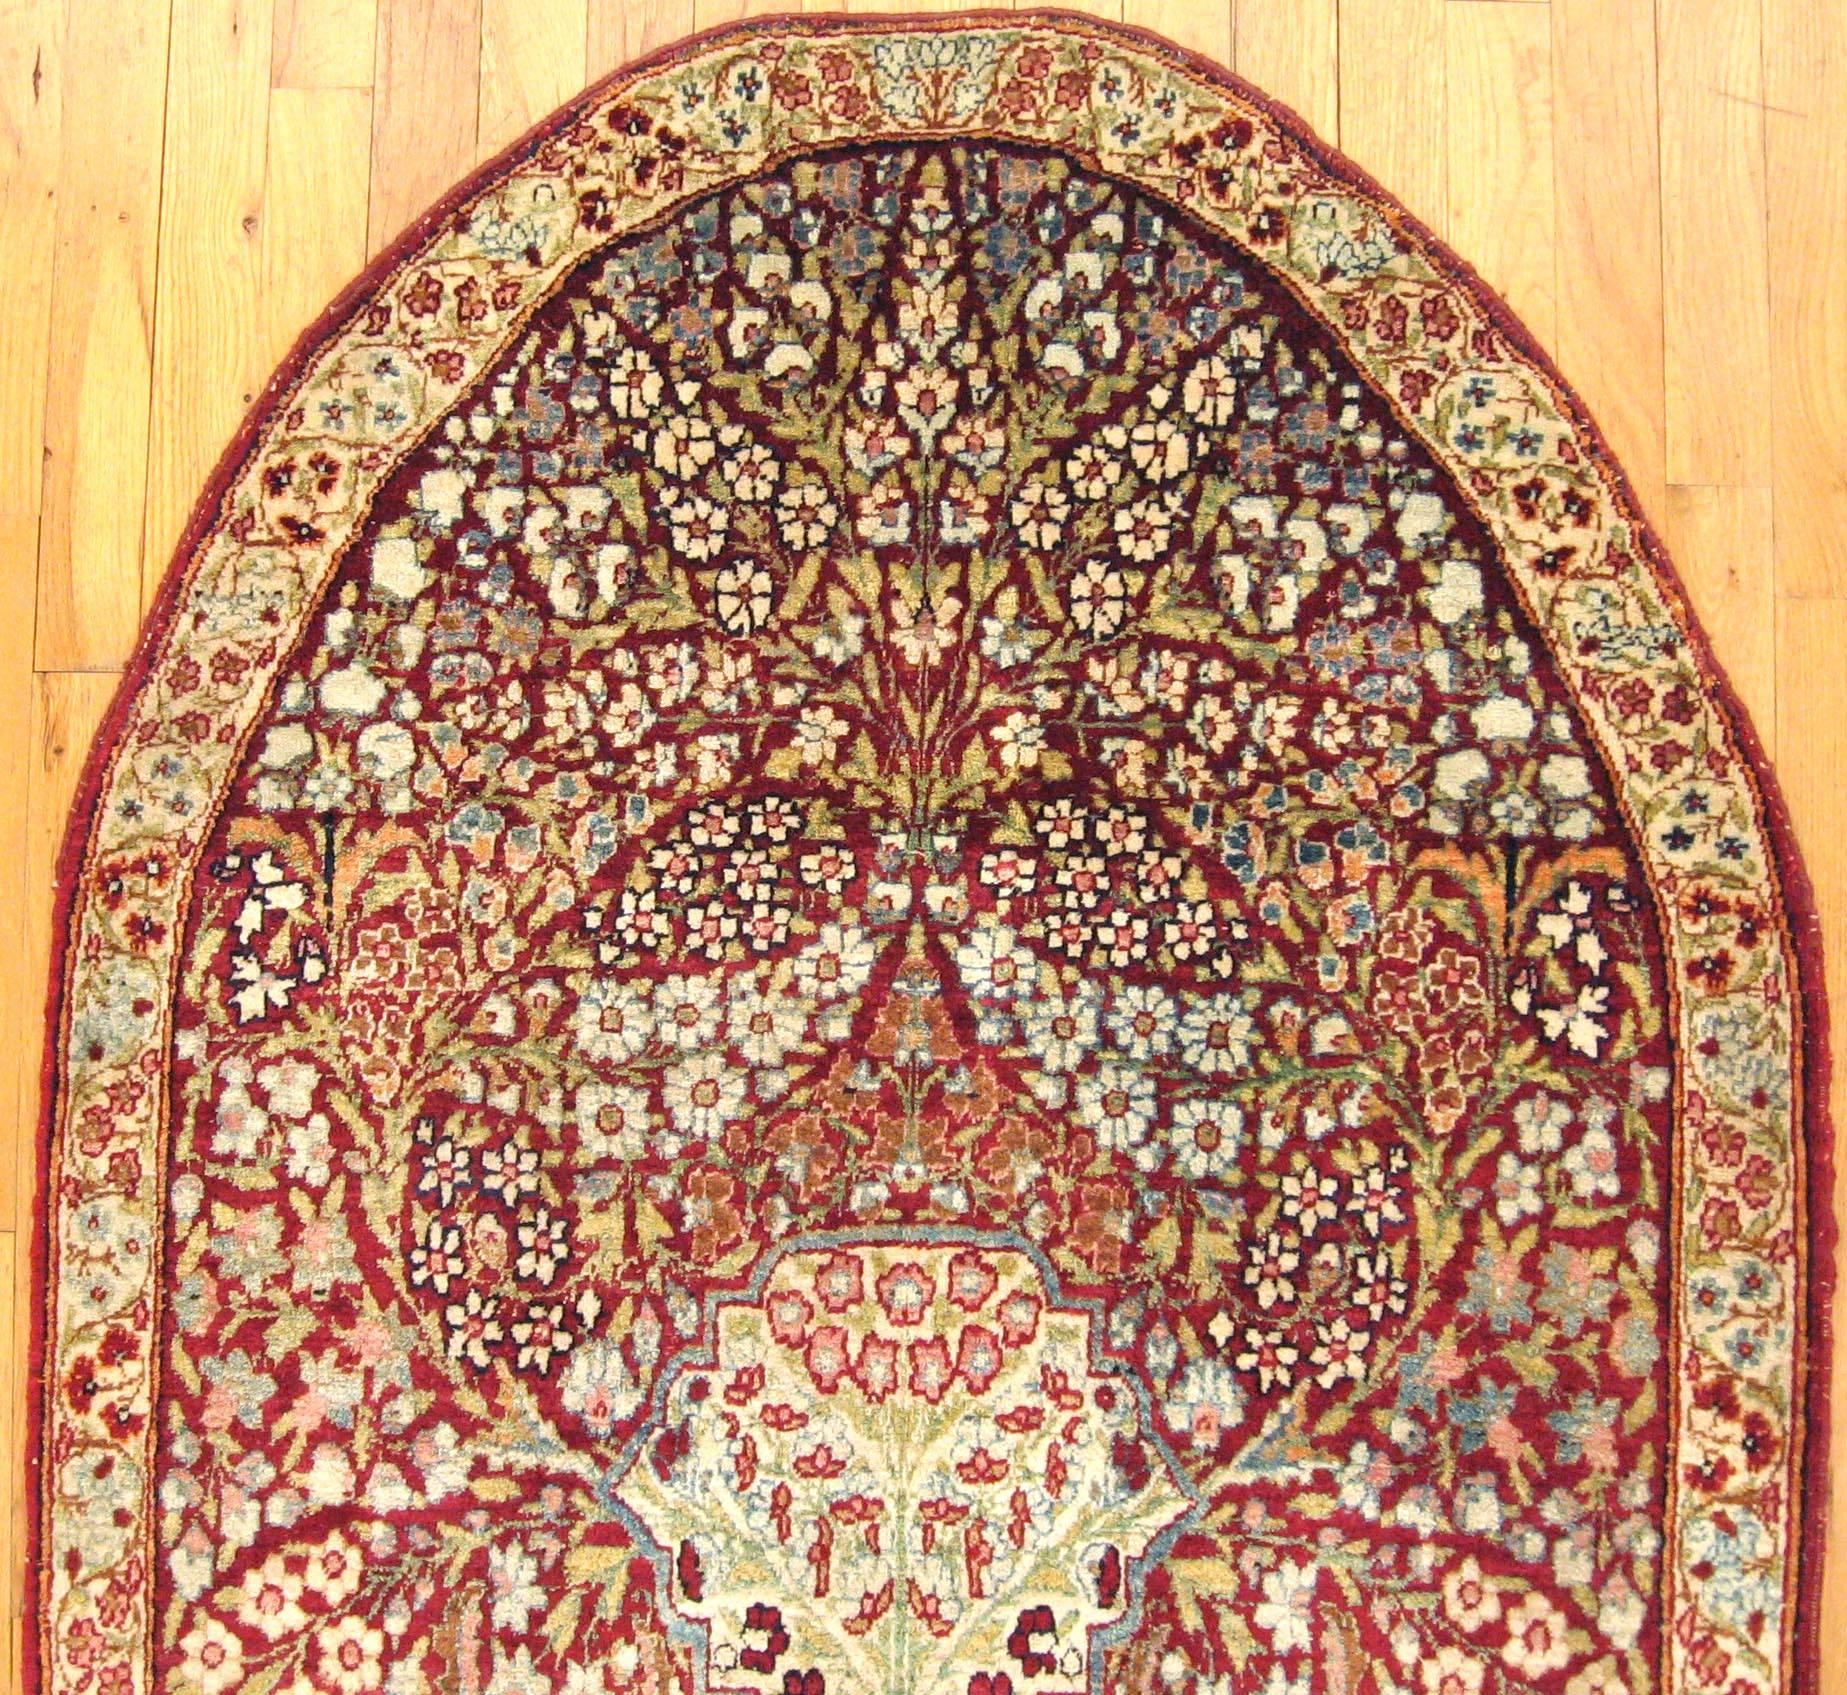 Hand-Knotted Antique Persian Kerman Oriental Rug, Small Size, w/ One End Rounded, Wool & Silk